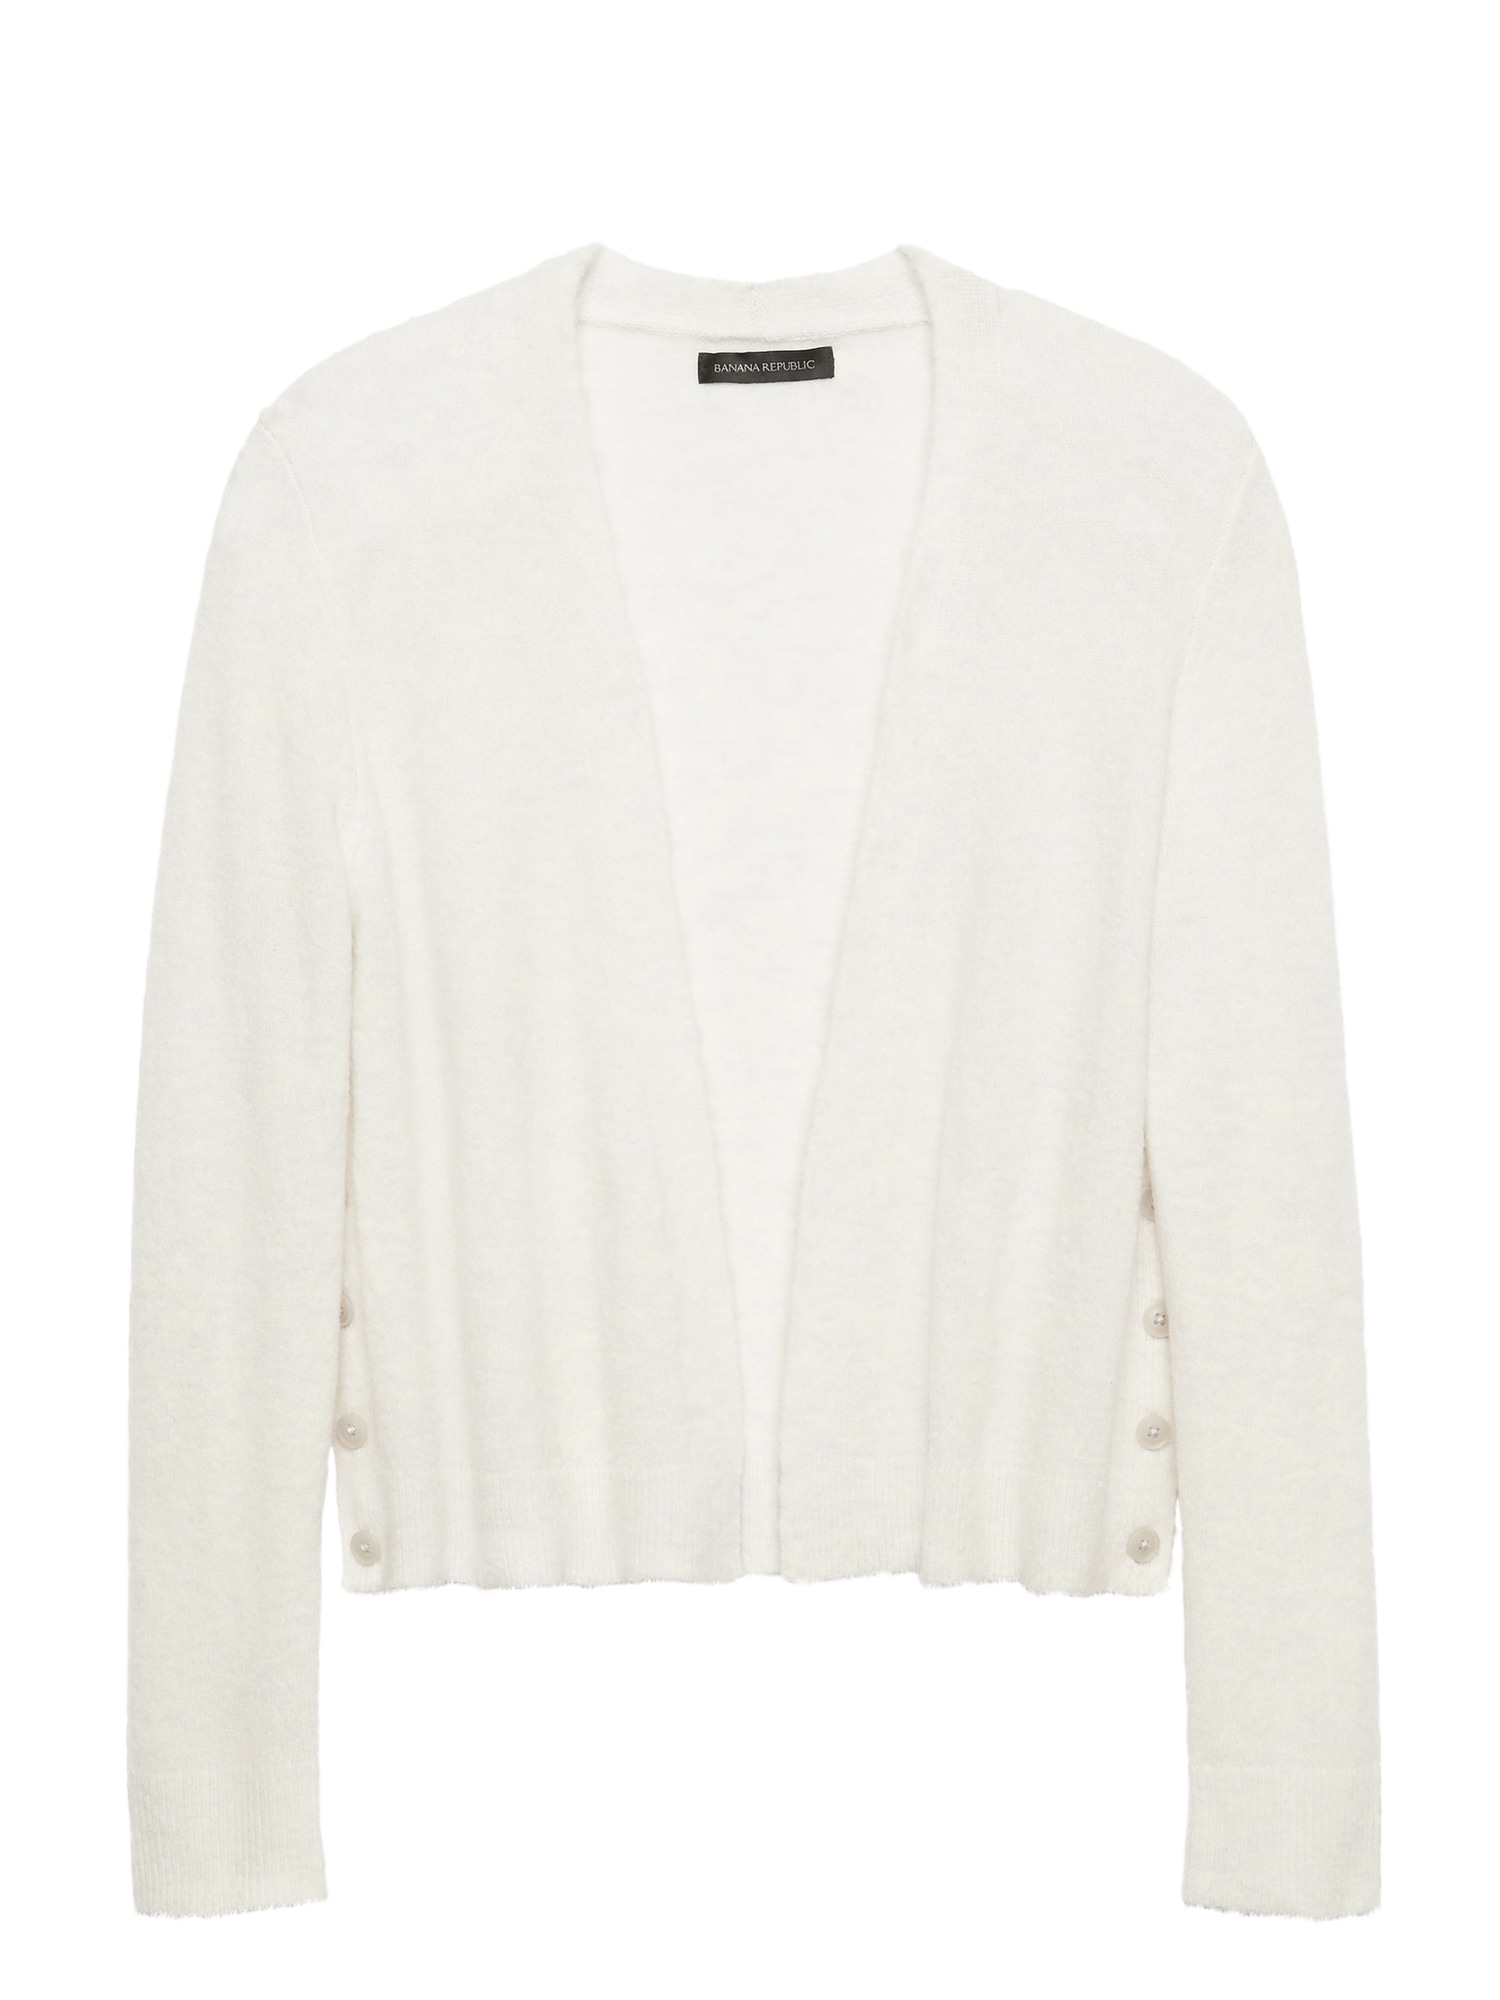 Petite Aire Button-Side Cropped Cardigan Sweater